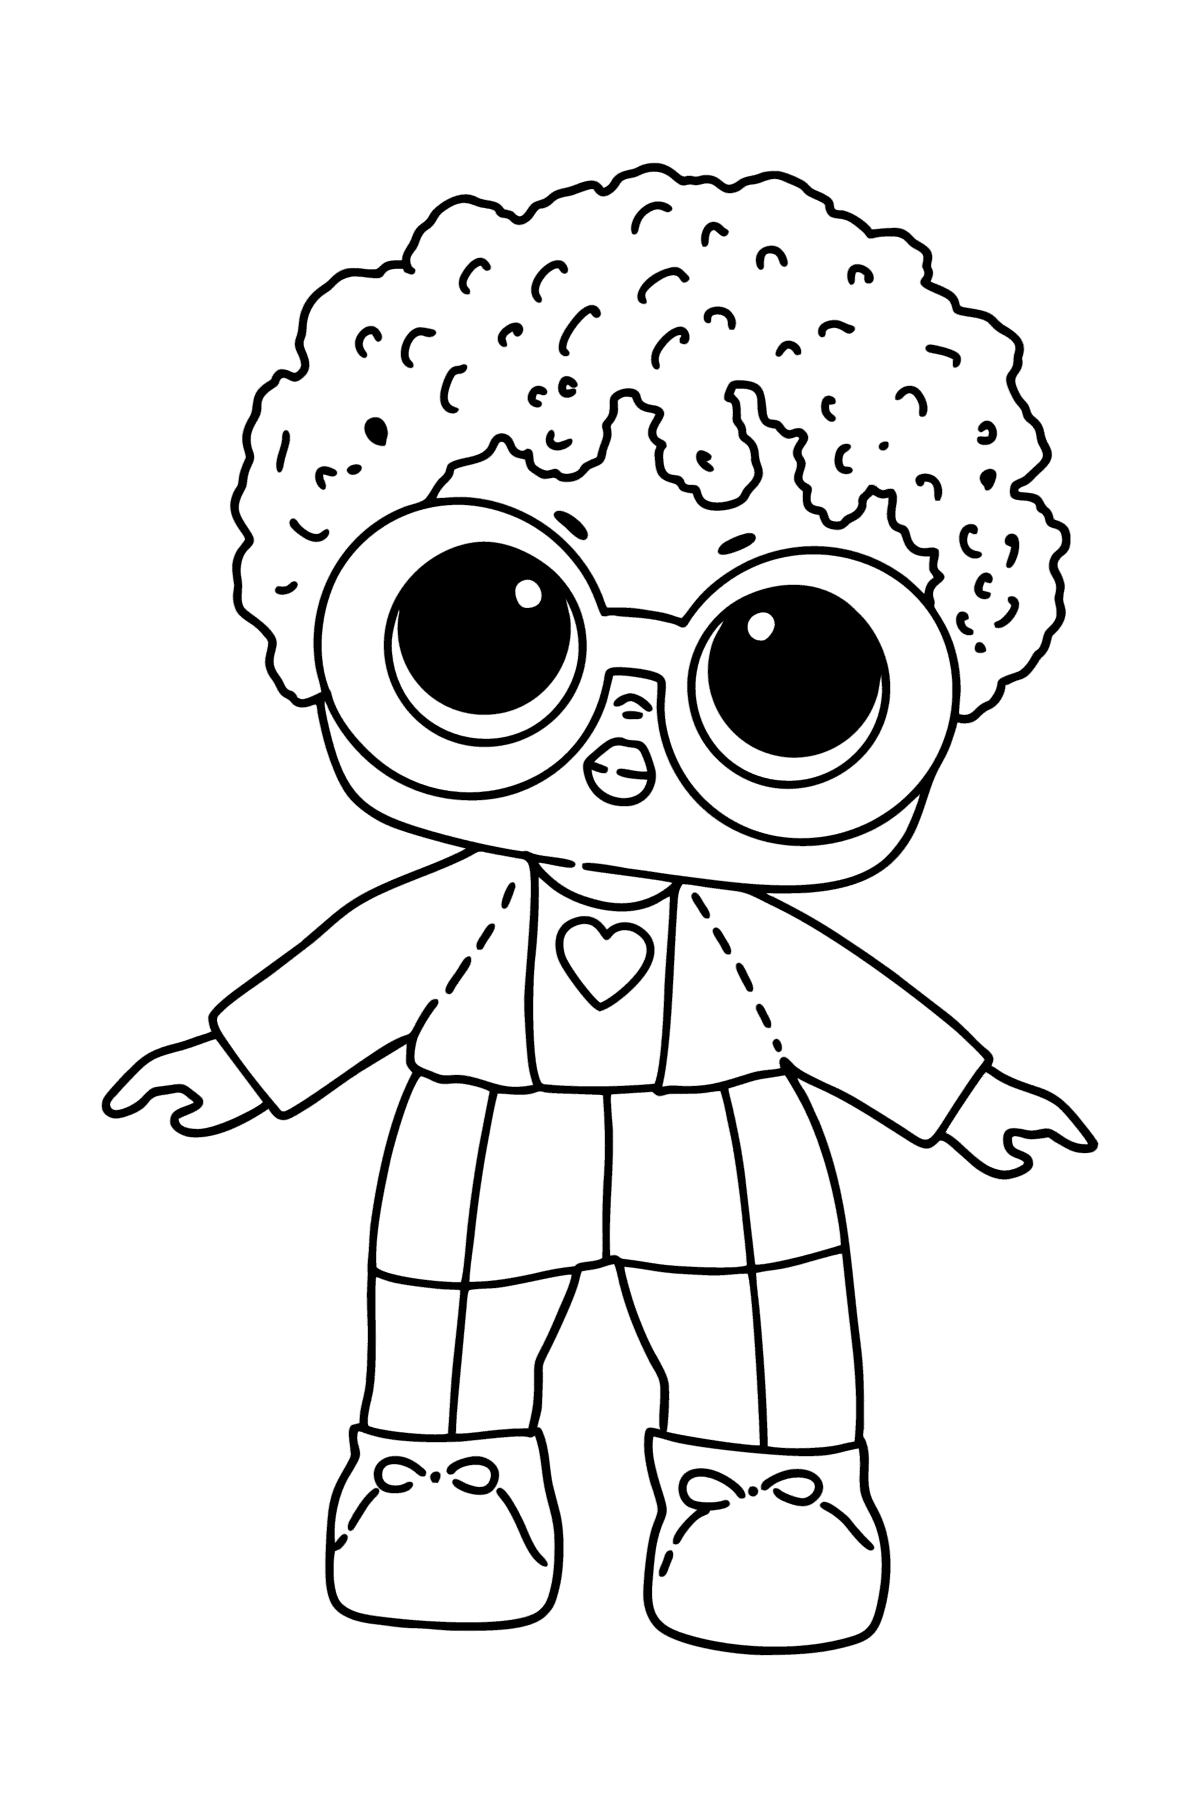 LOL Surprise Steezy Doll Boy coloring page - Coloring Pages for Kids